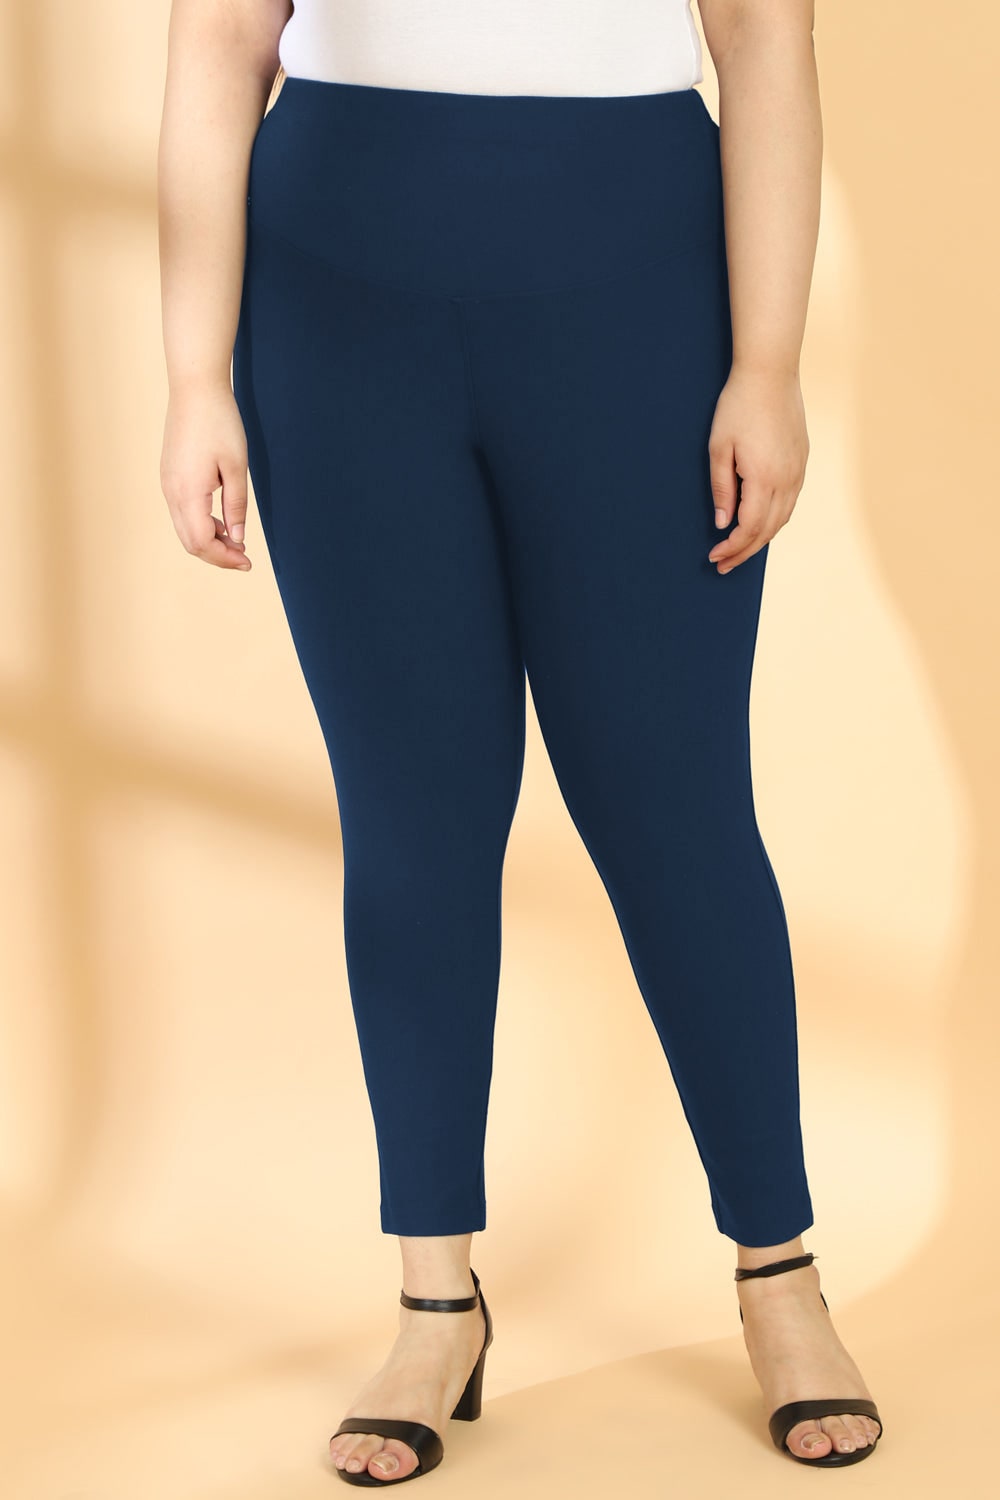 Buy Carbon Fiber Plus Size Leggings for Women High Waisted Pants W/ High  Performance Print Non See Through Perfect for Yoga, Running and Workout  Online in India 